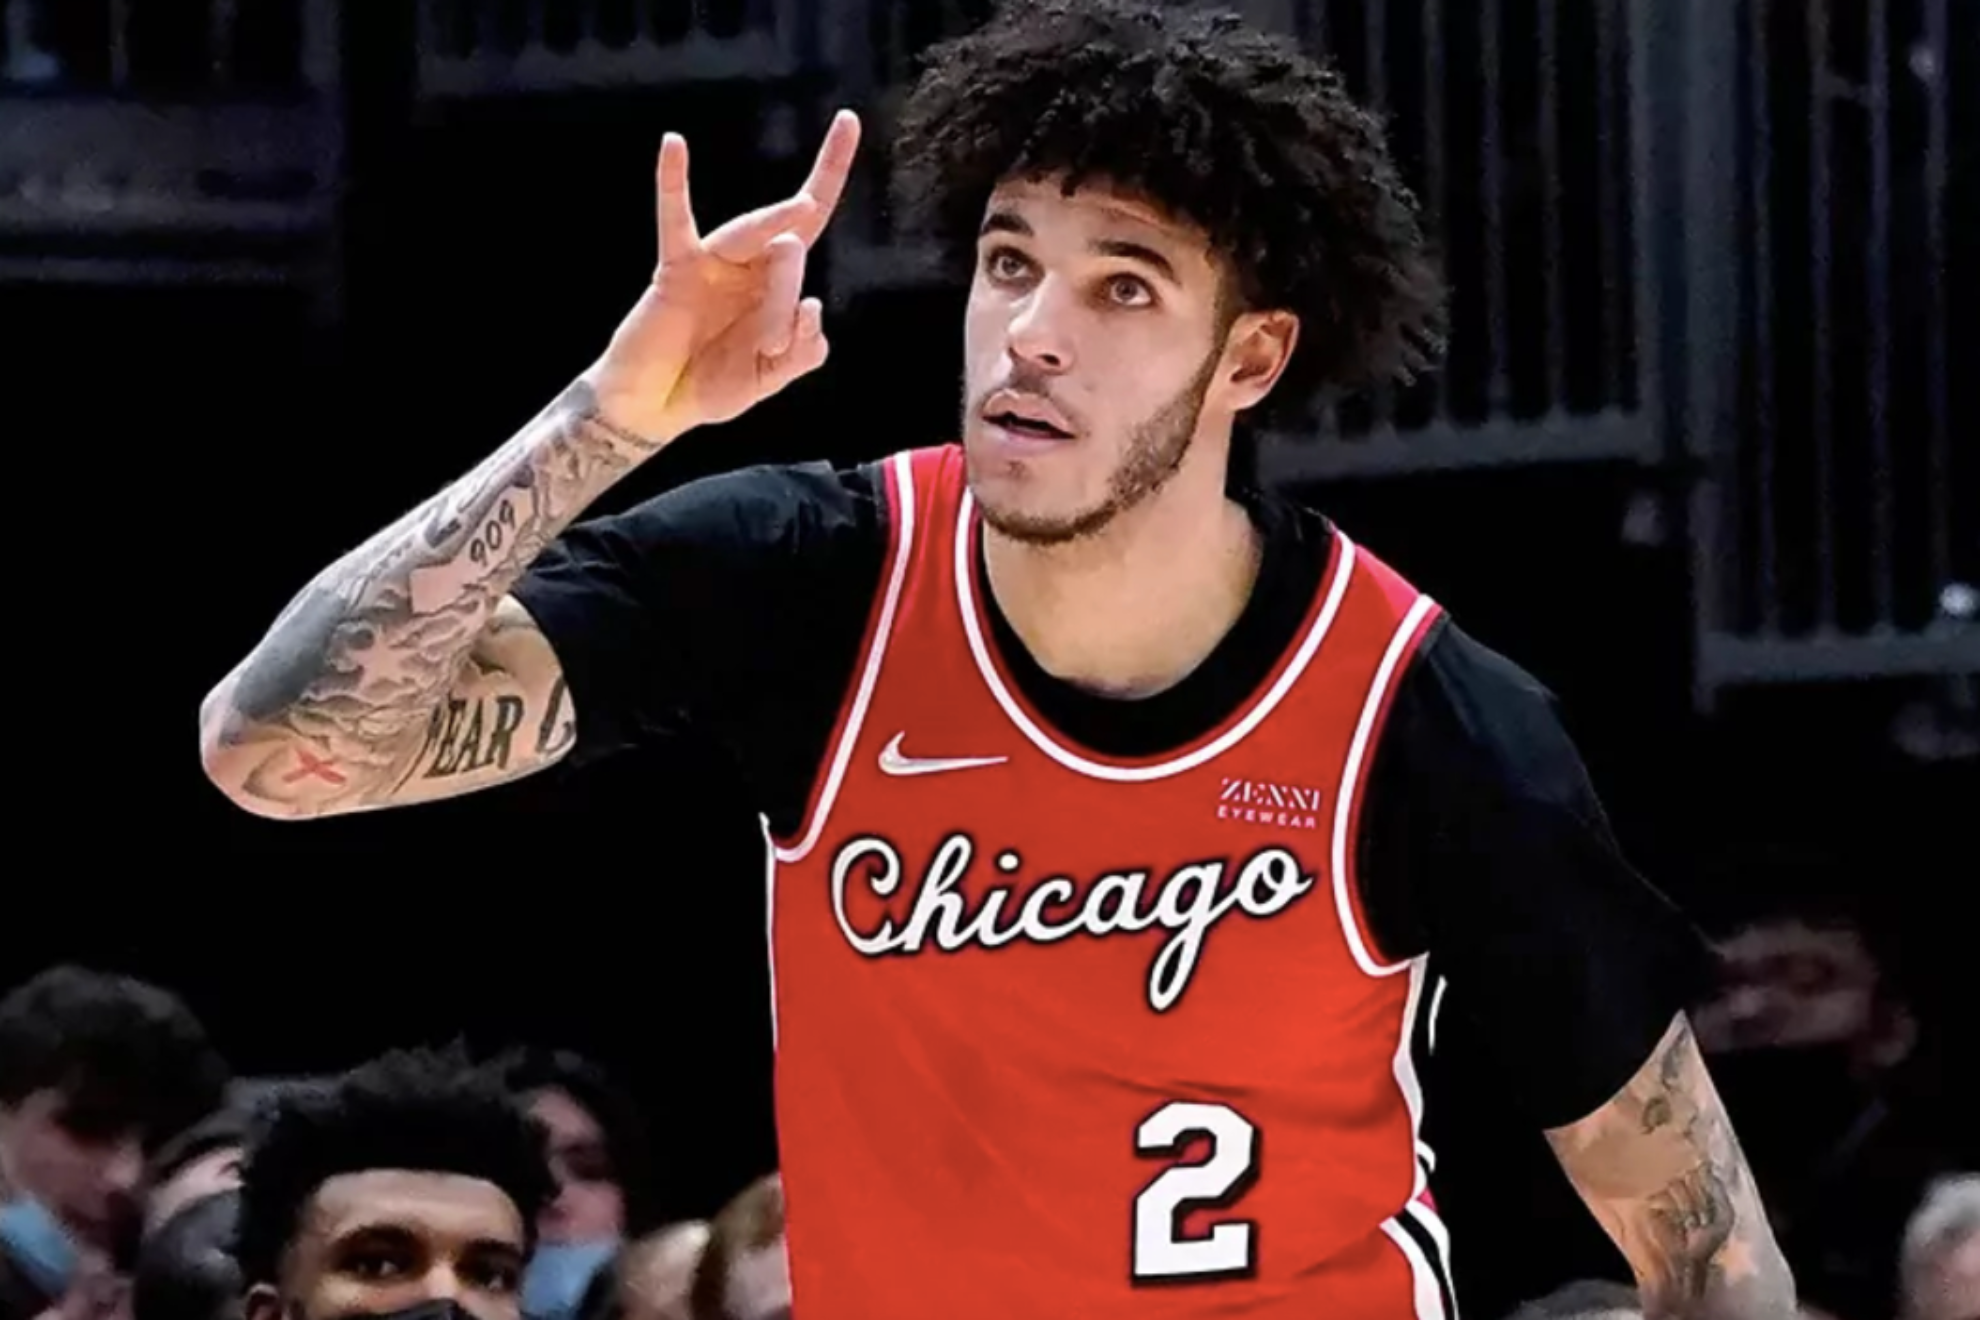 Chicago Bulls granted injury exception for Lonzo Ball: How much DPE were they afforded?